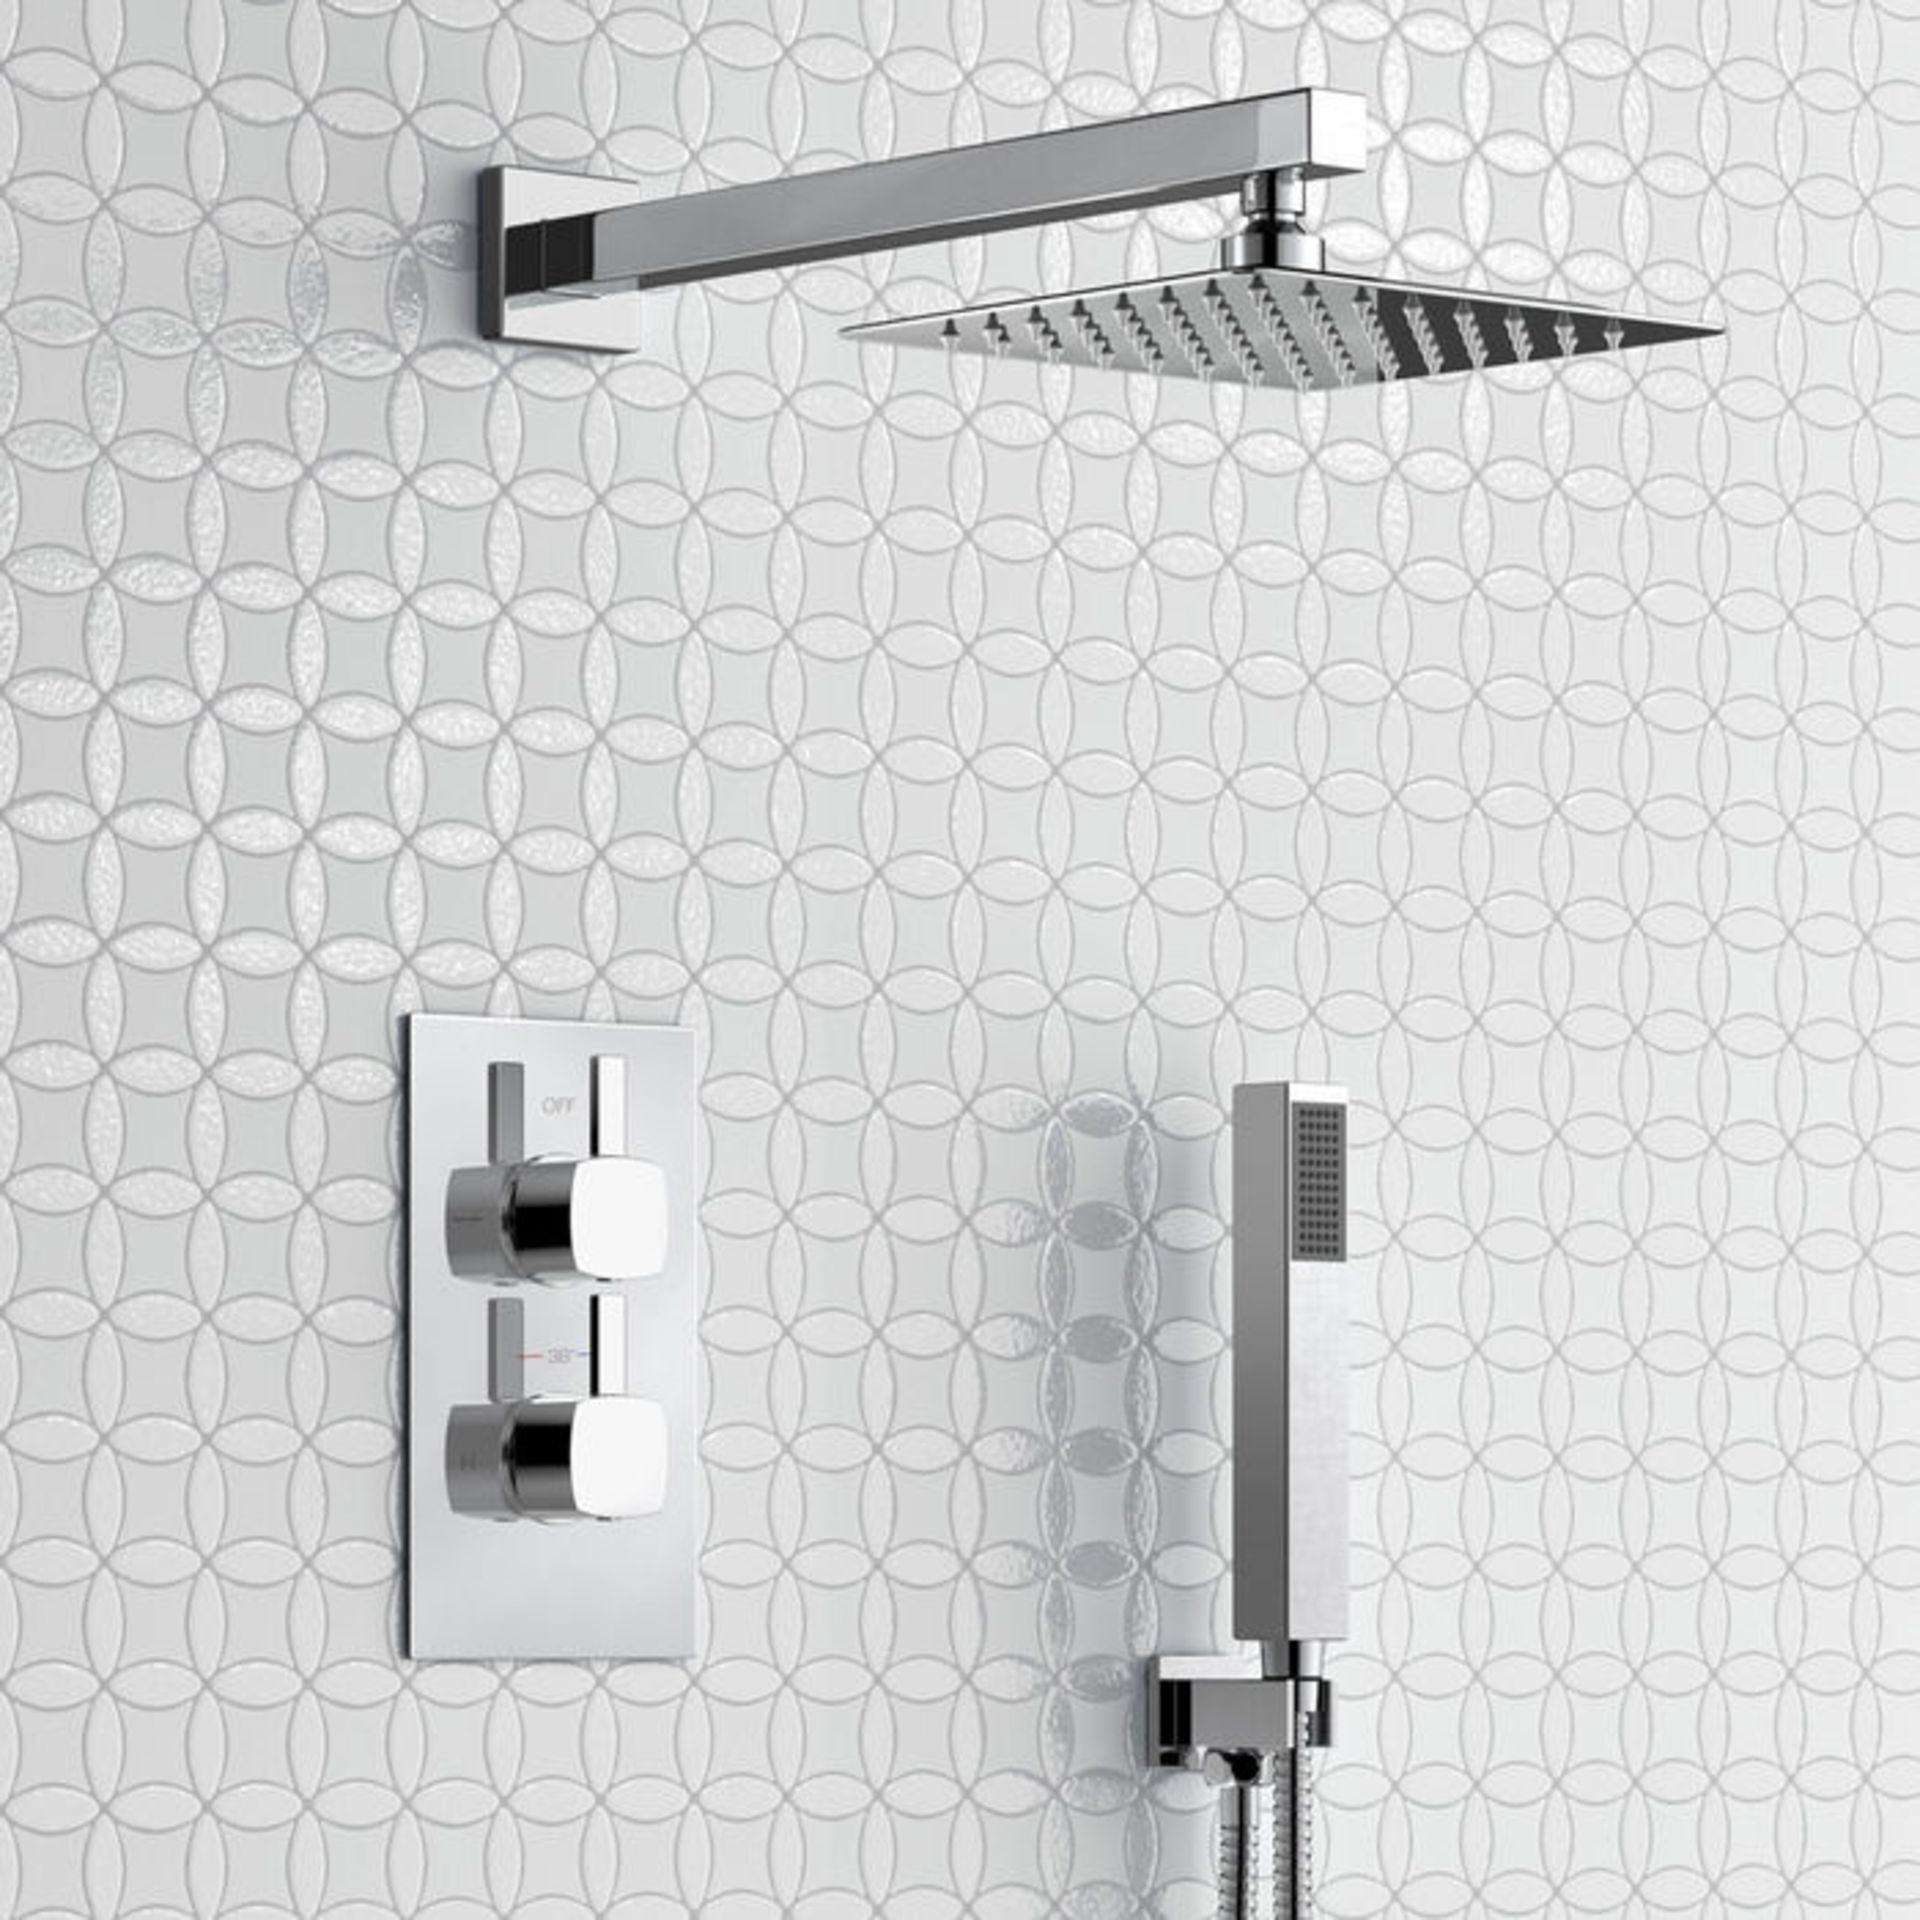 (H37) Square Concealed Thermostatic Mixer Shower Kit & Medium Head. Family friendly detachable - Image 2 of 6